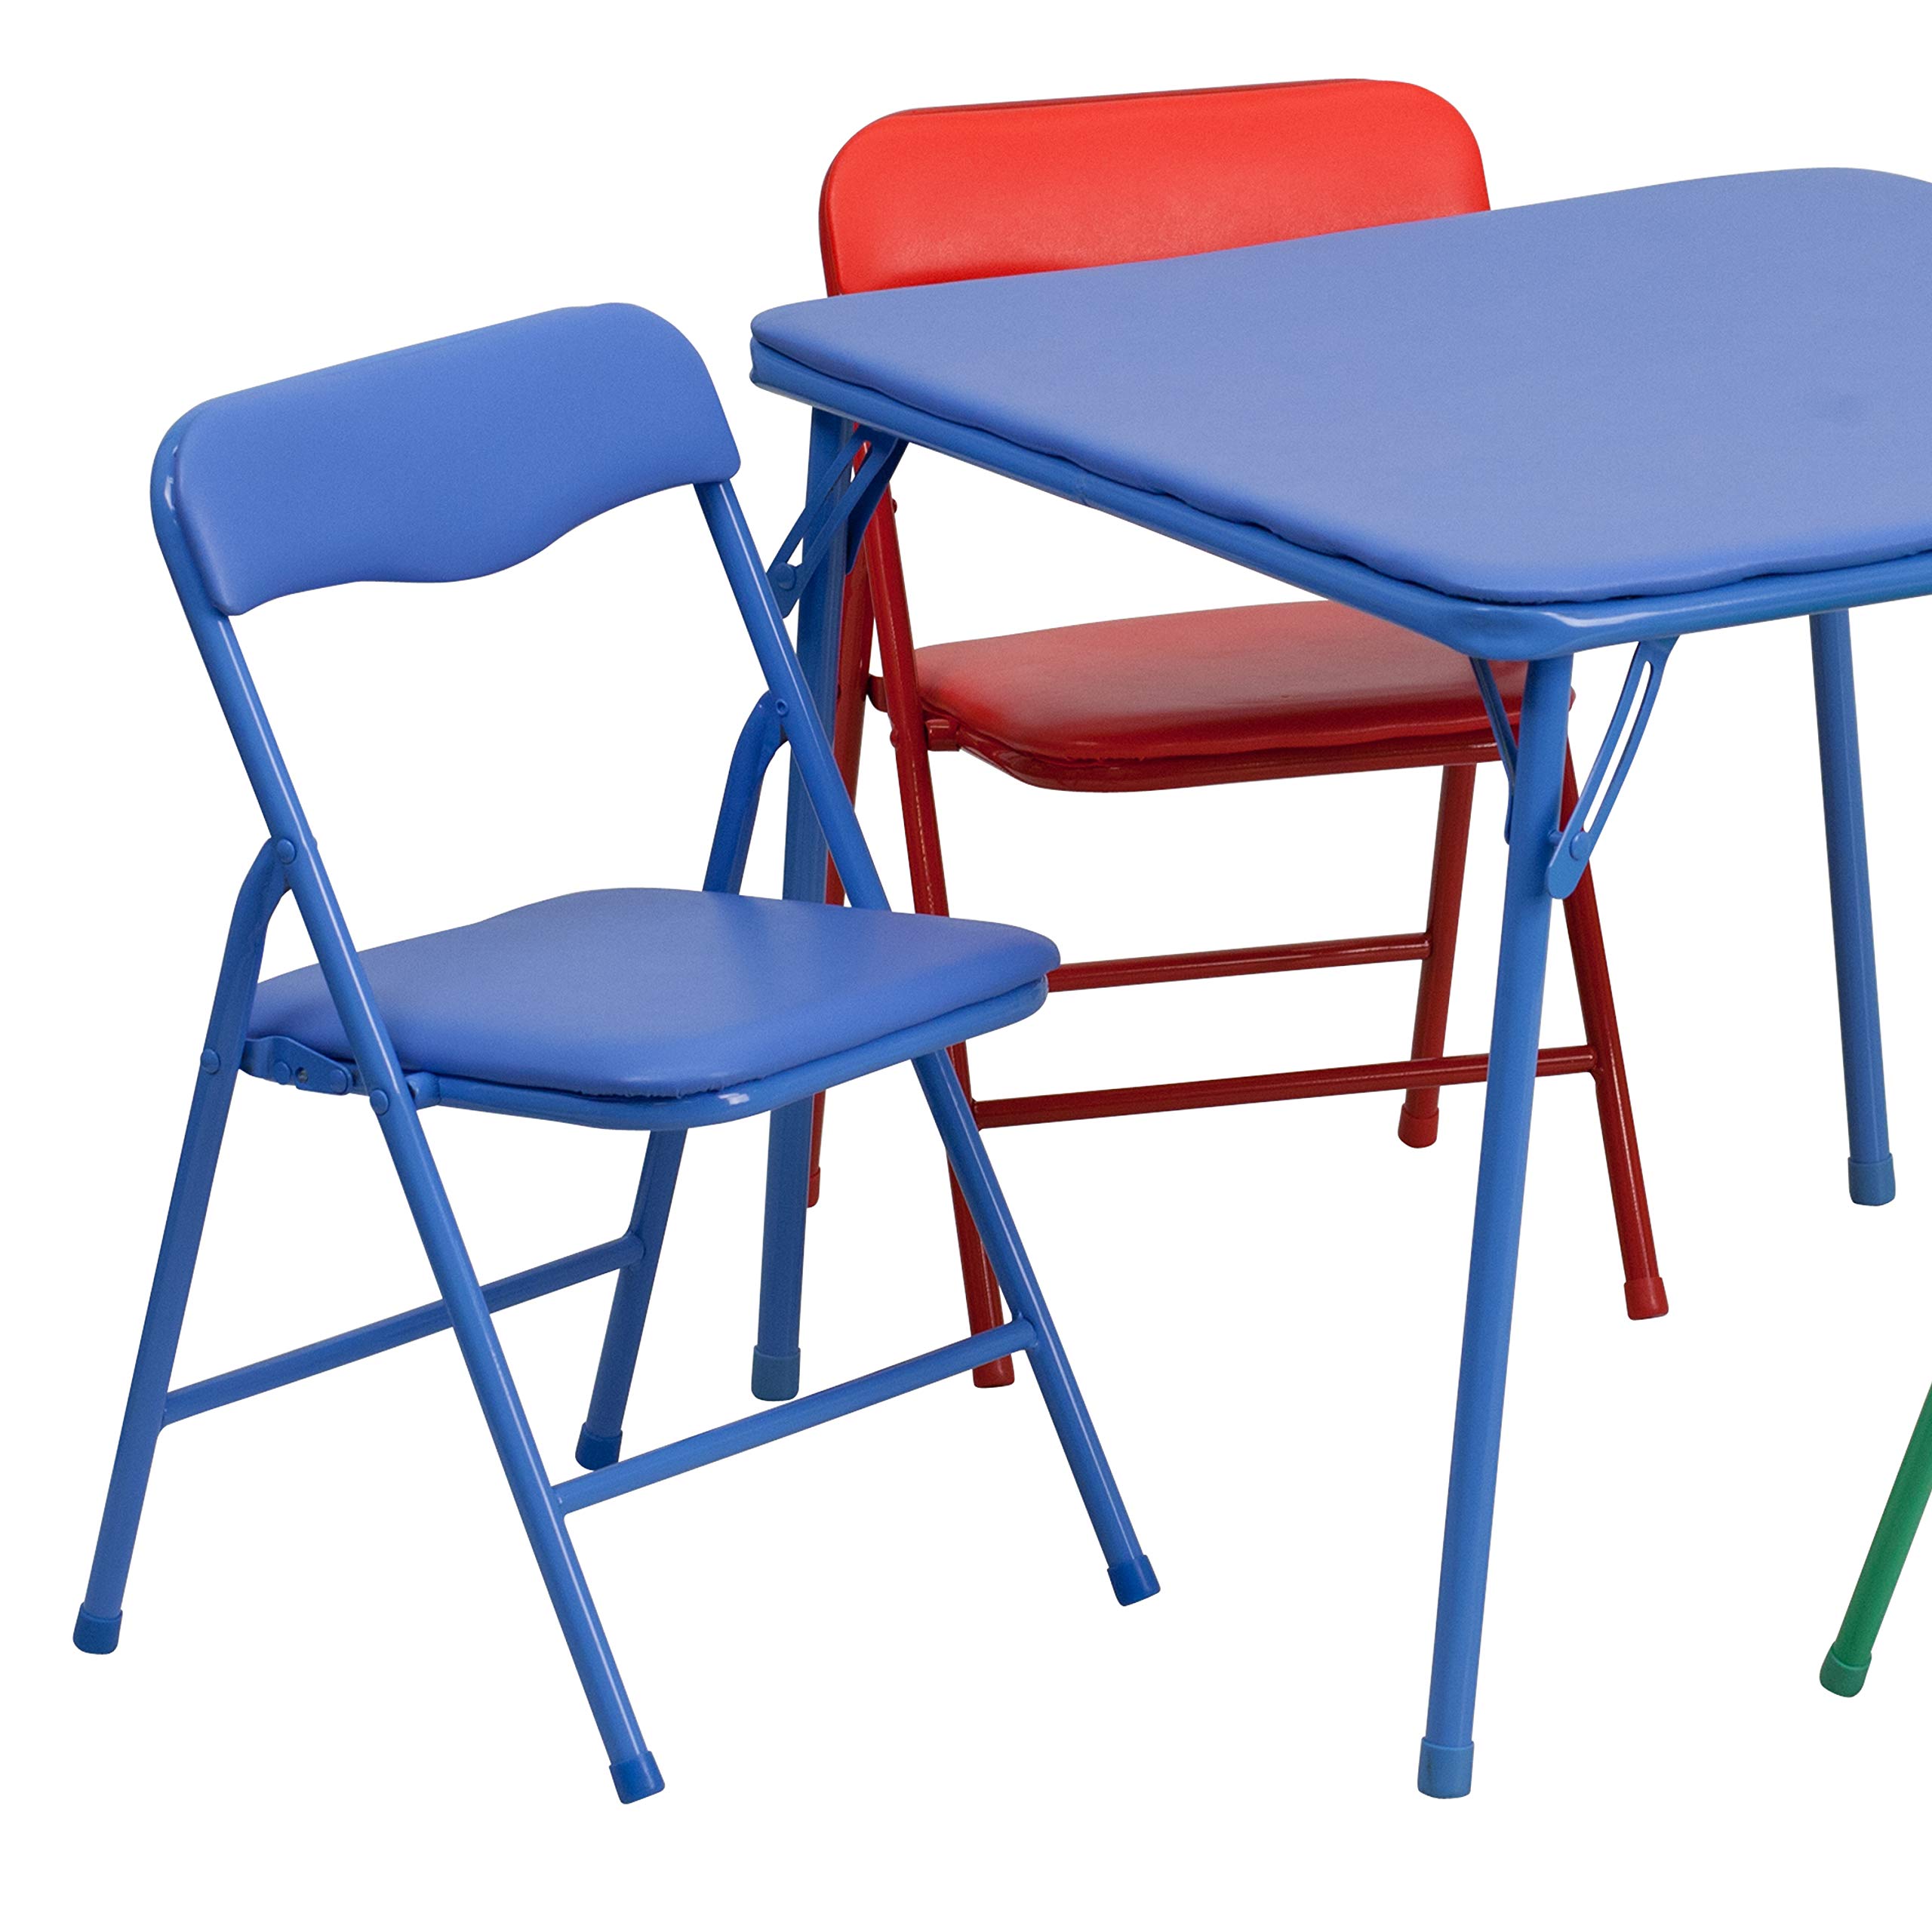 Flash Furniture Mindy Kids Colorful Folding Table and Chair Set, Blue, 5 Piece